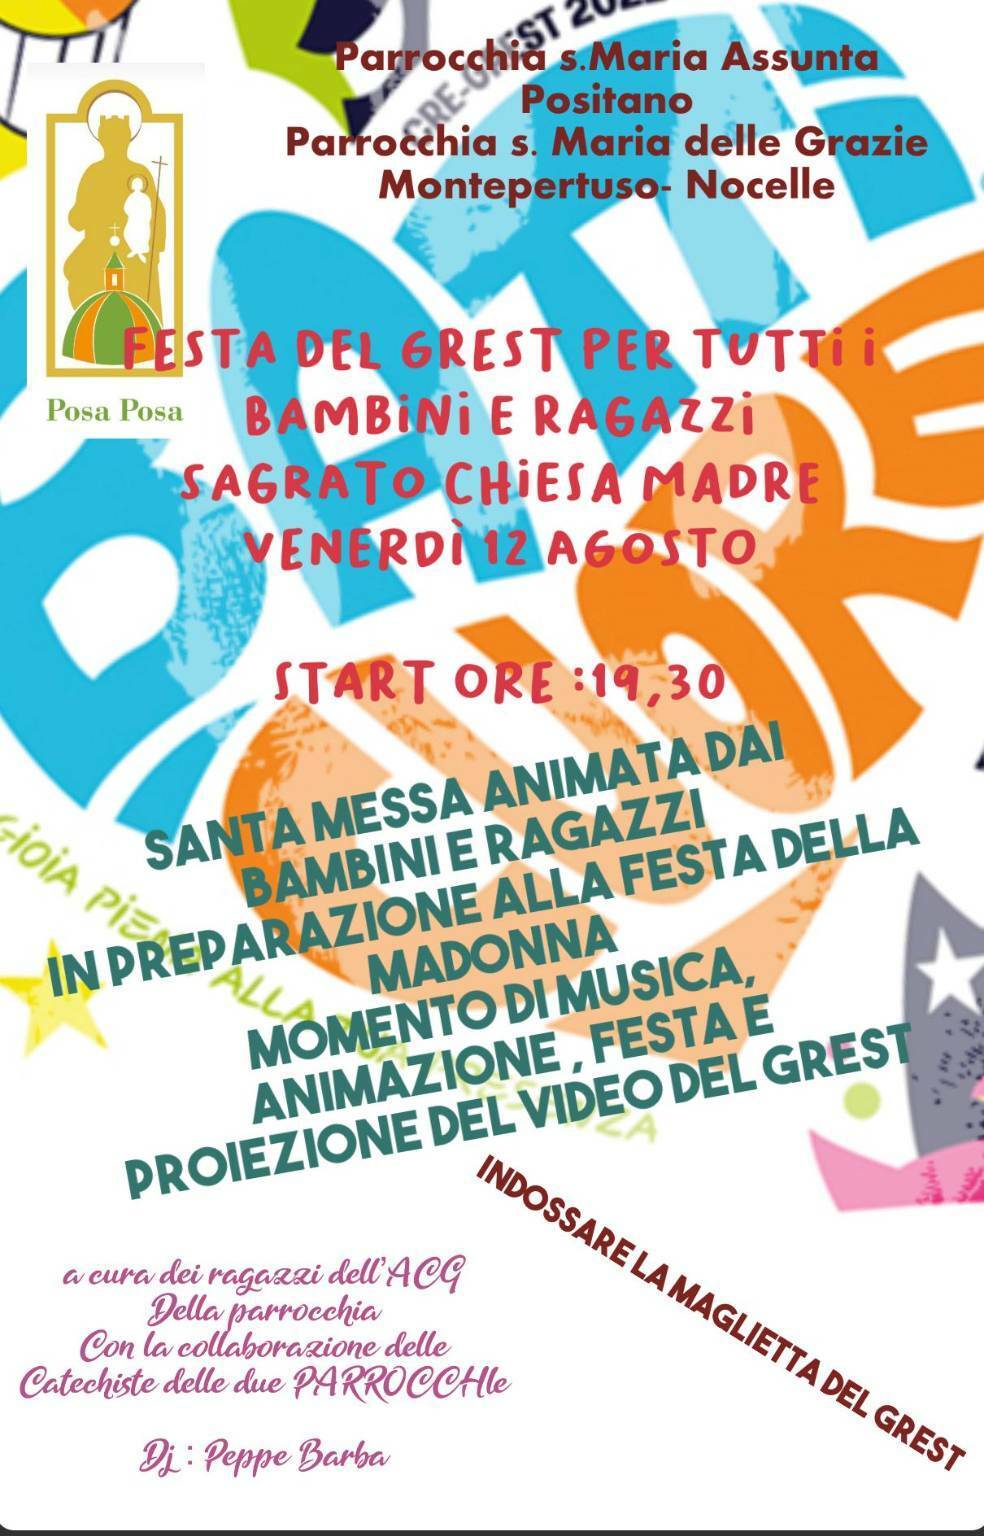 Positano, festival of the Grest for the children and young people of the local parishes